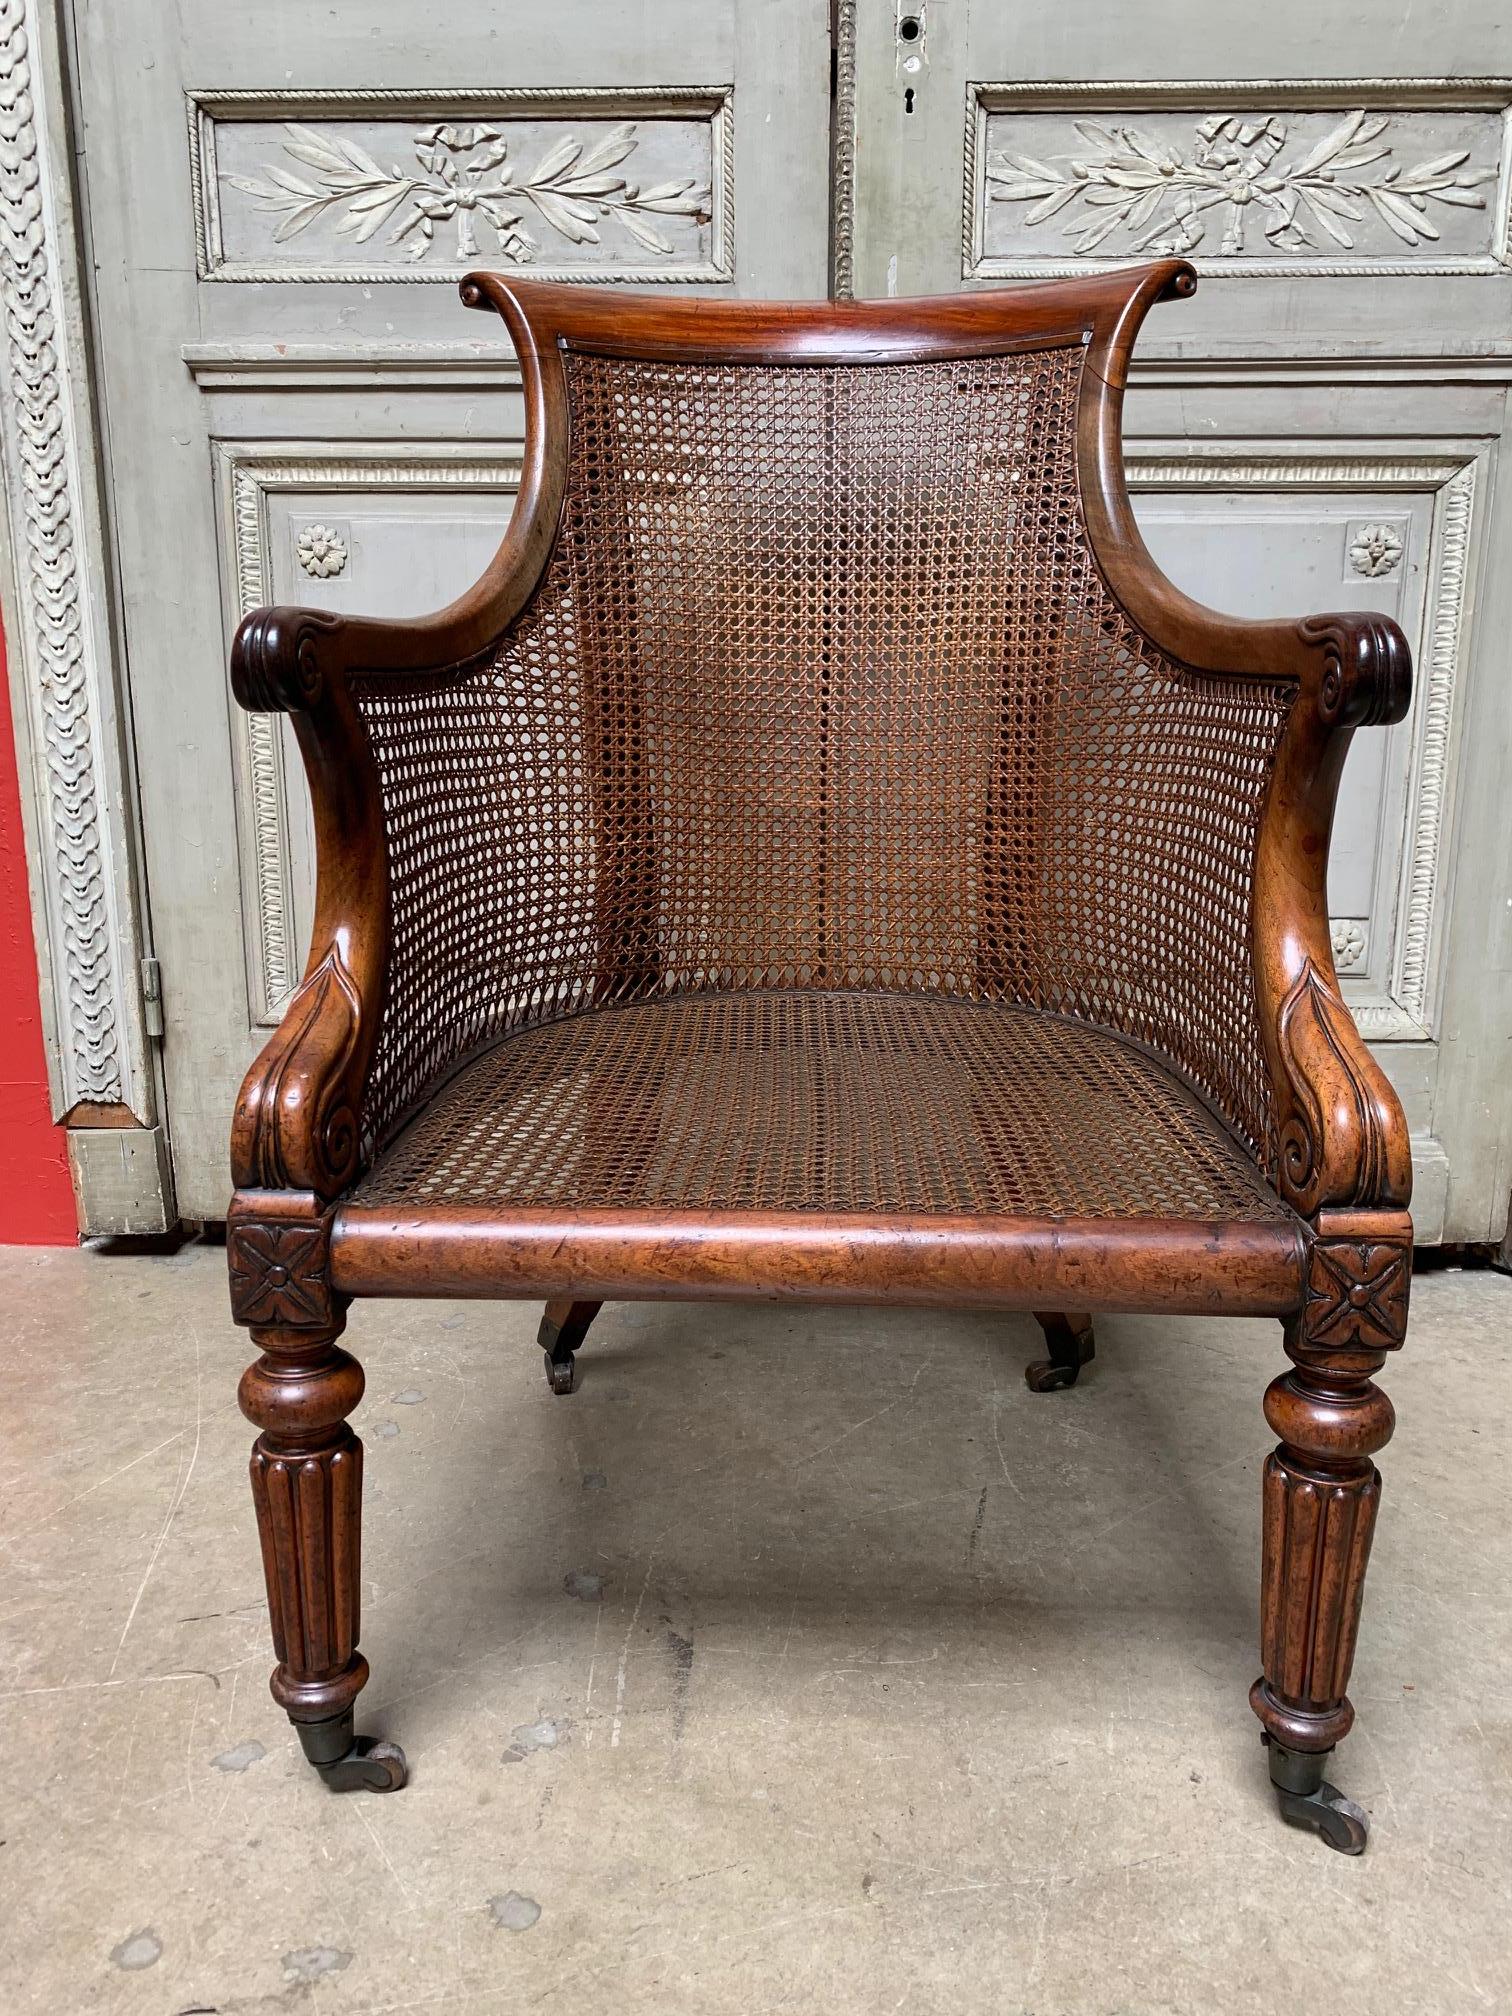 Brass 19th Century English William IV Walnut Library Chair with Cane